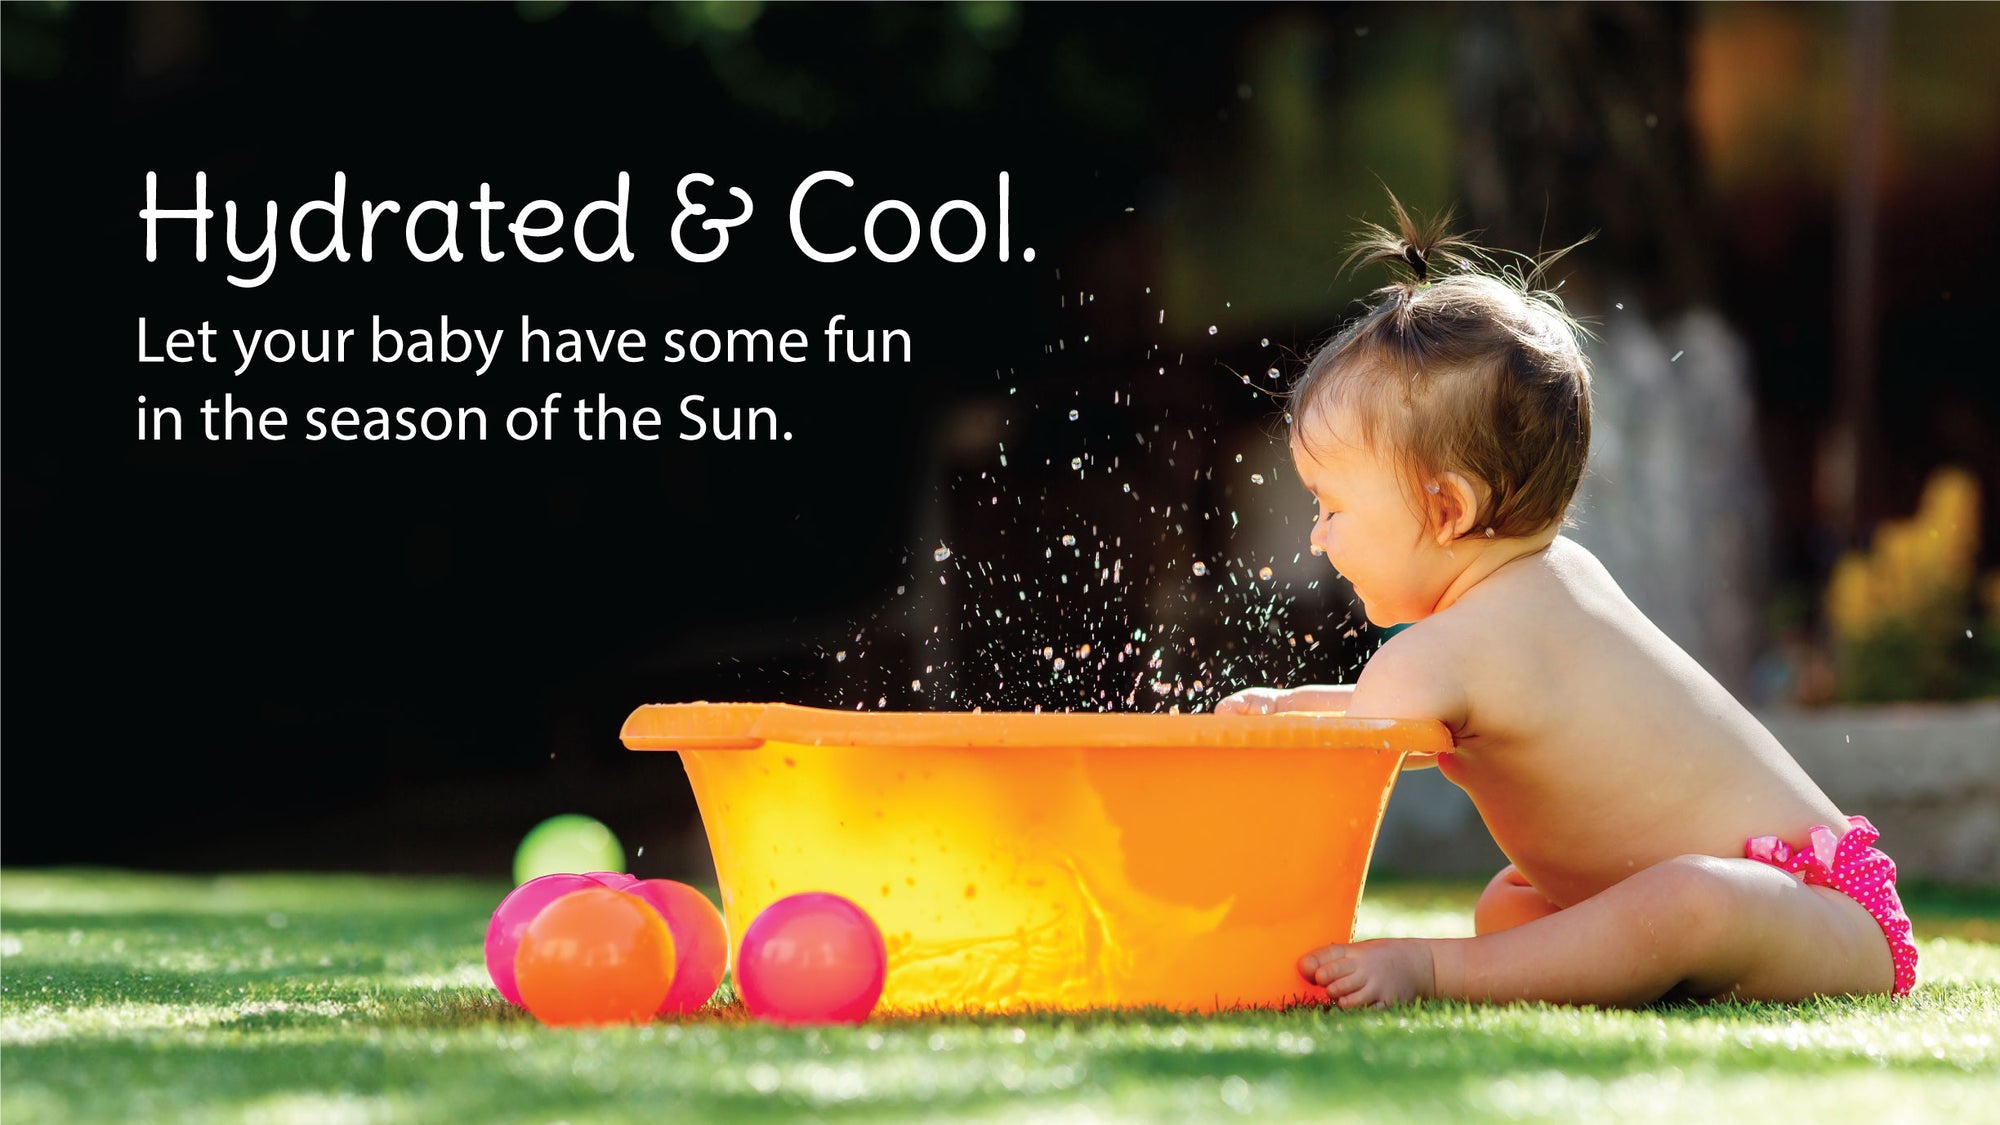 Hydrated and Cool, let your baby have some fun in the season of the Sun.